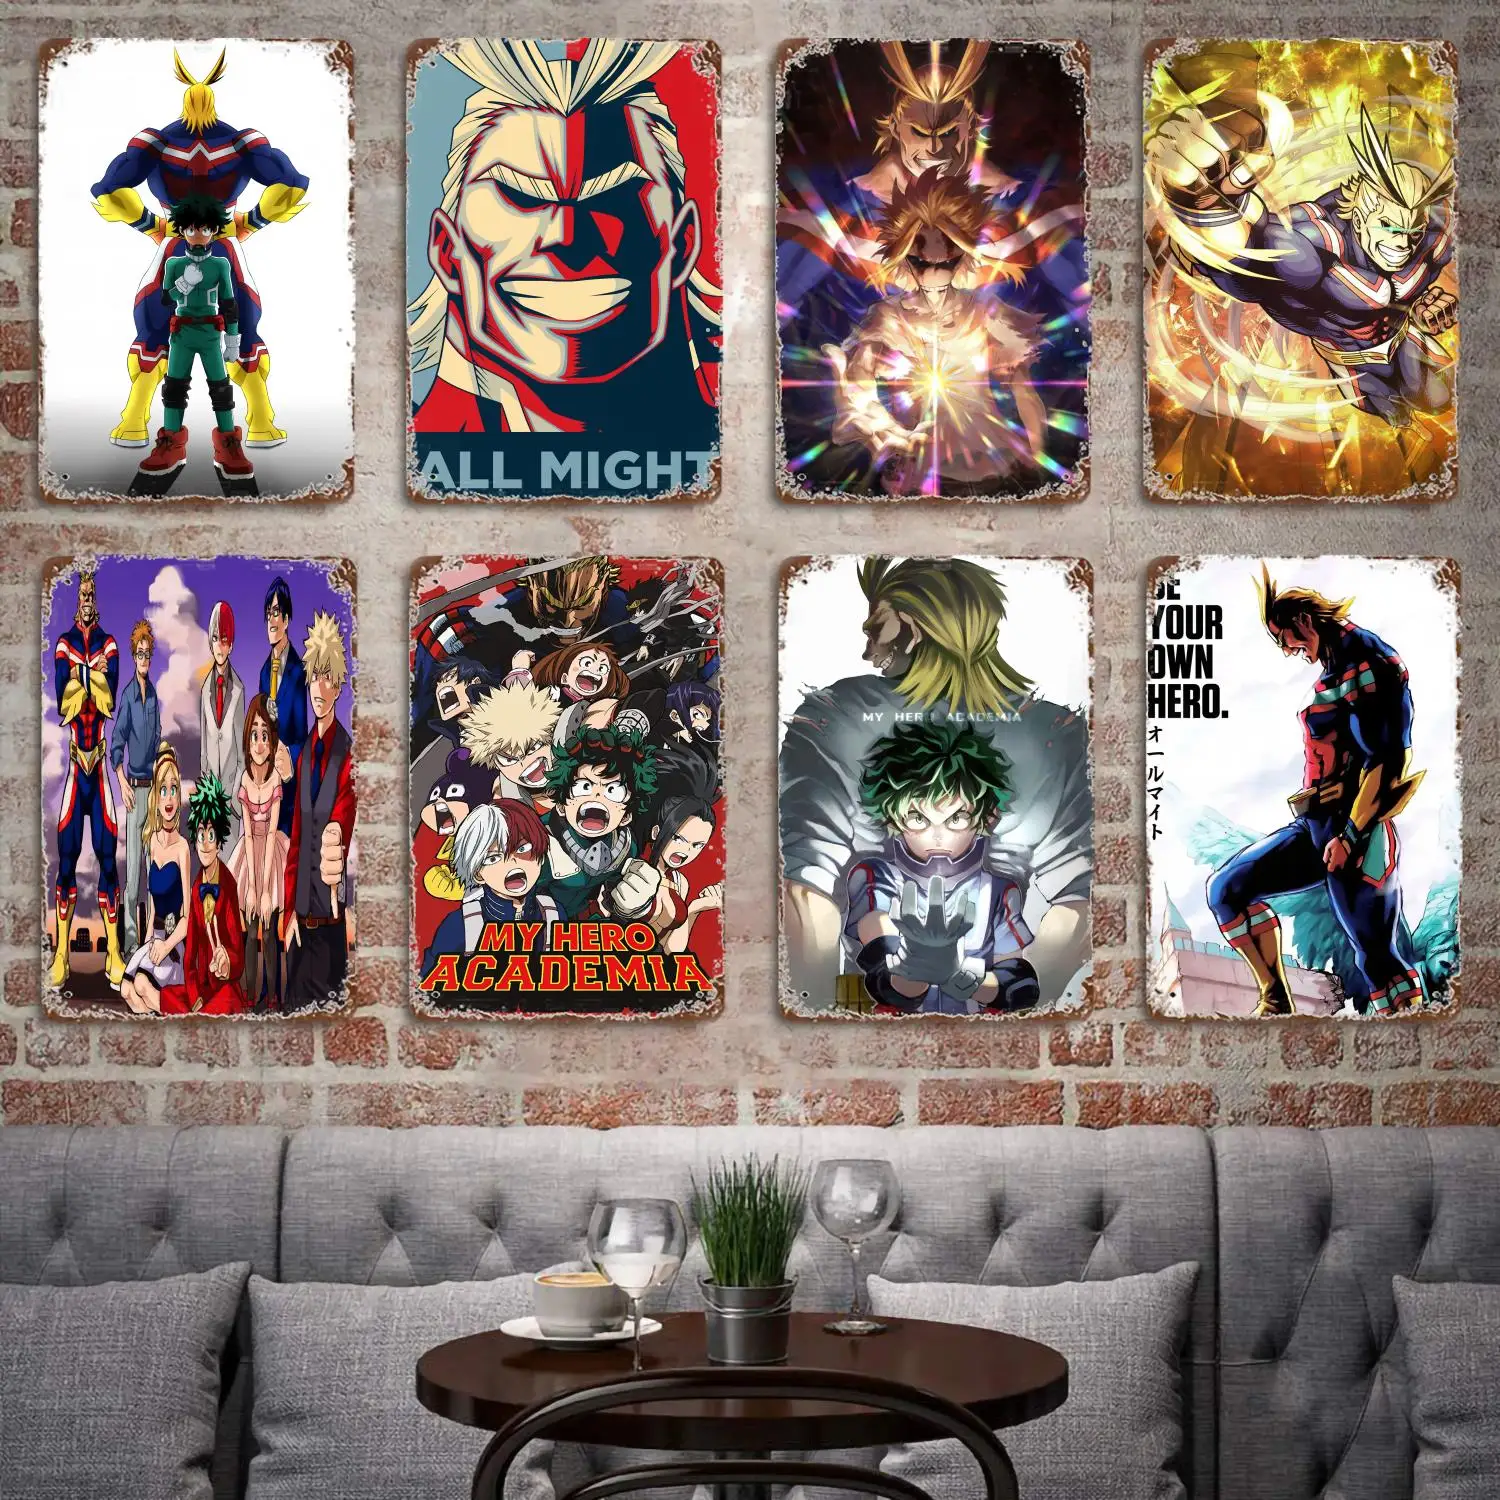 

Anime Academia All Might Decor Poster Vintage Tin Sign Metal Sign Decorative Plaque for Pub Bar Man Cave Club Wall Decoration